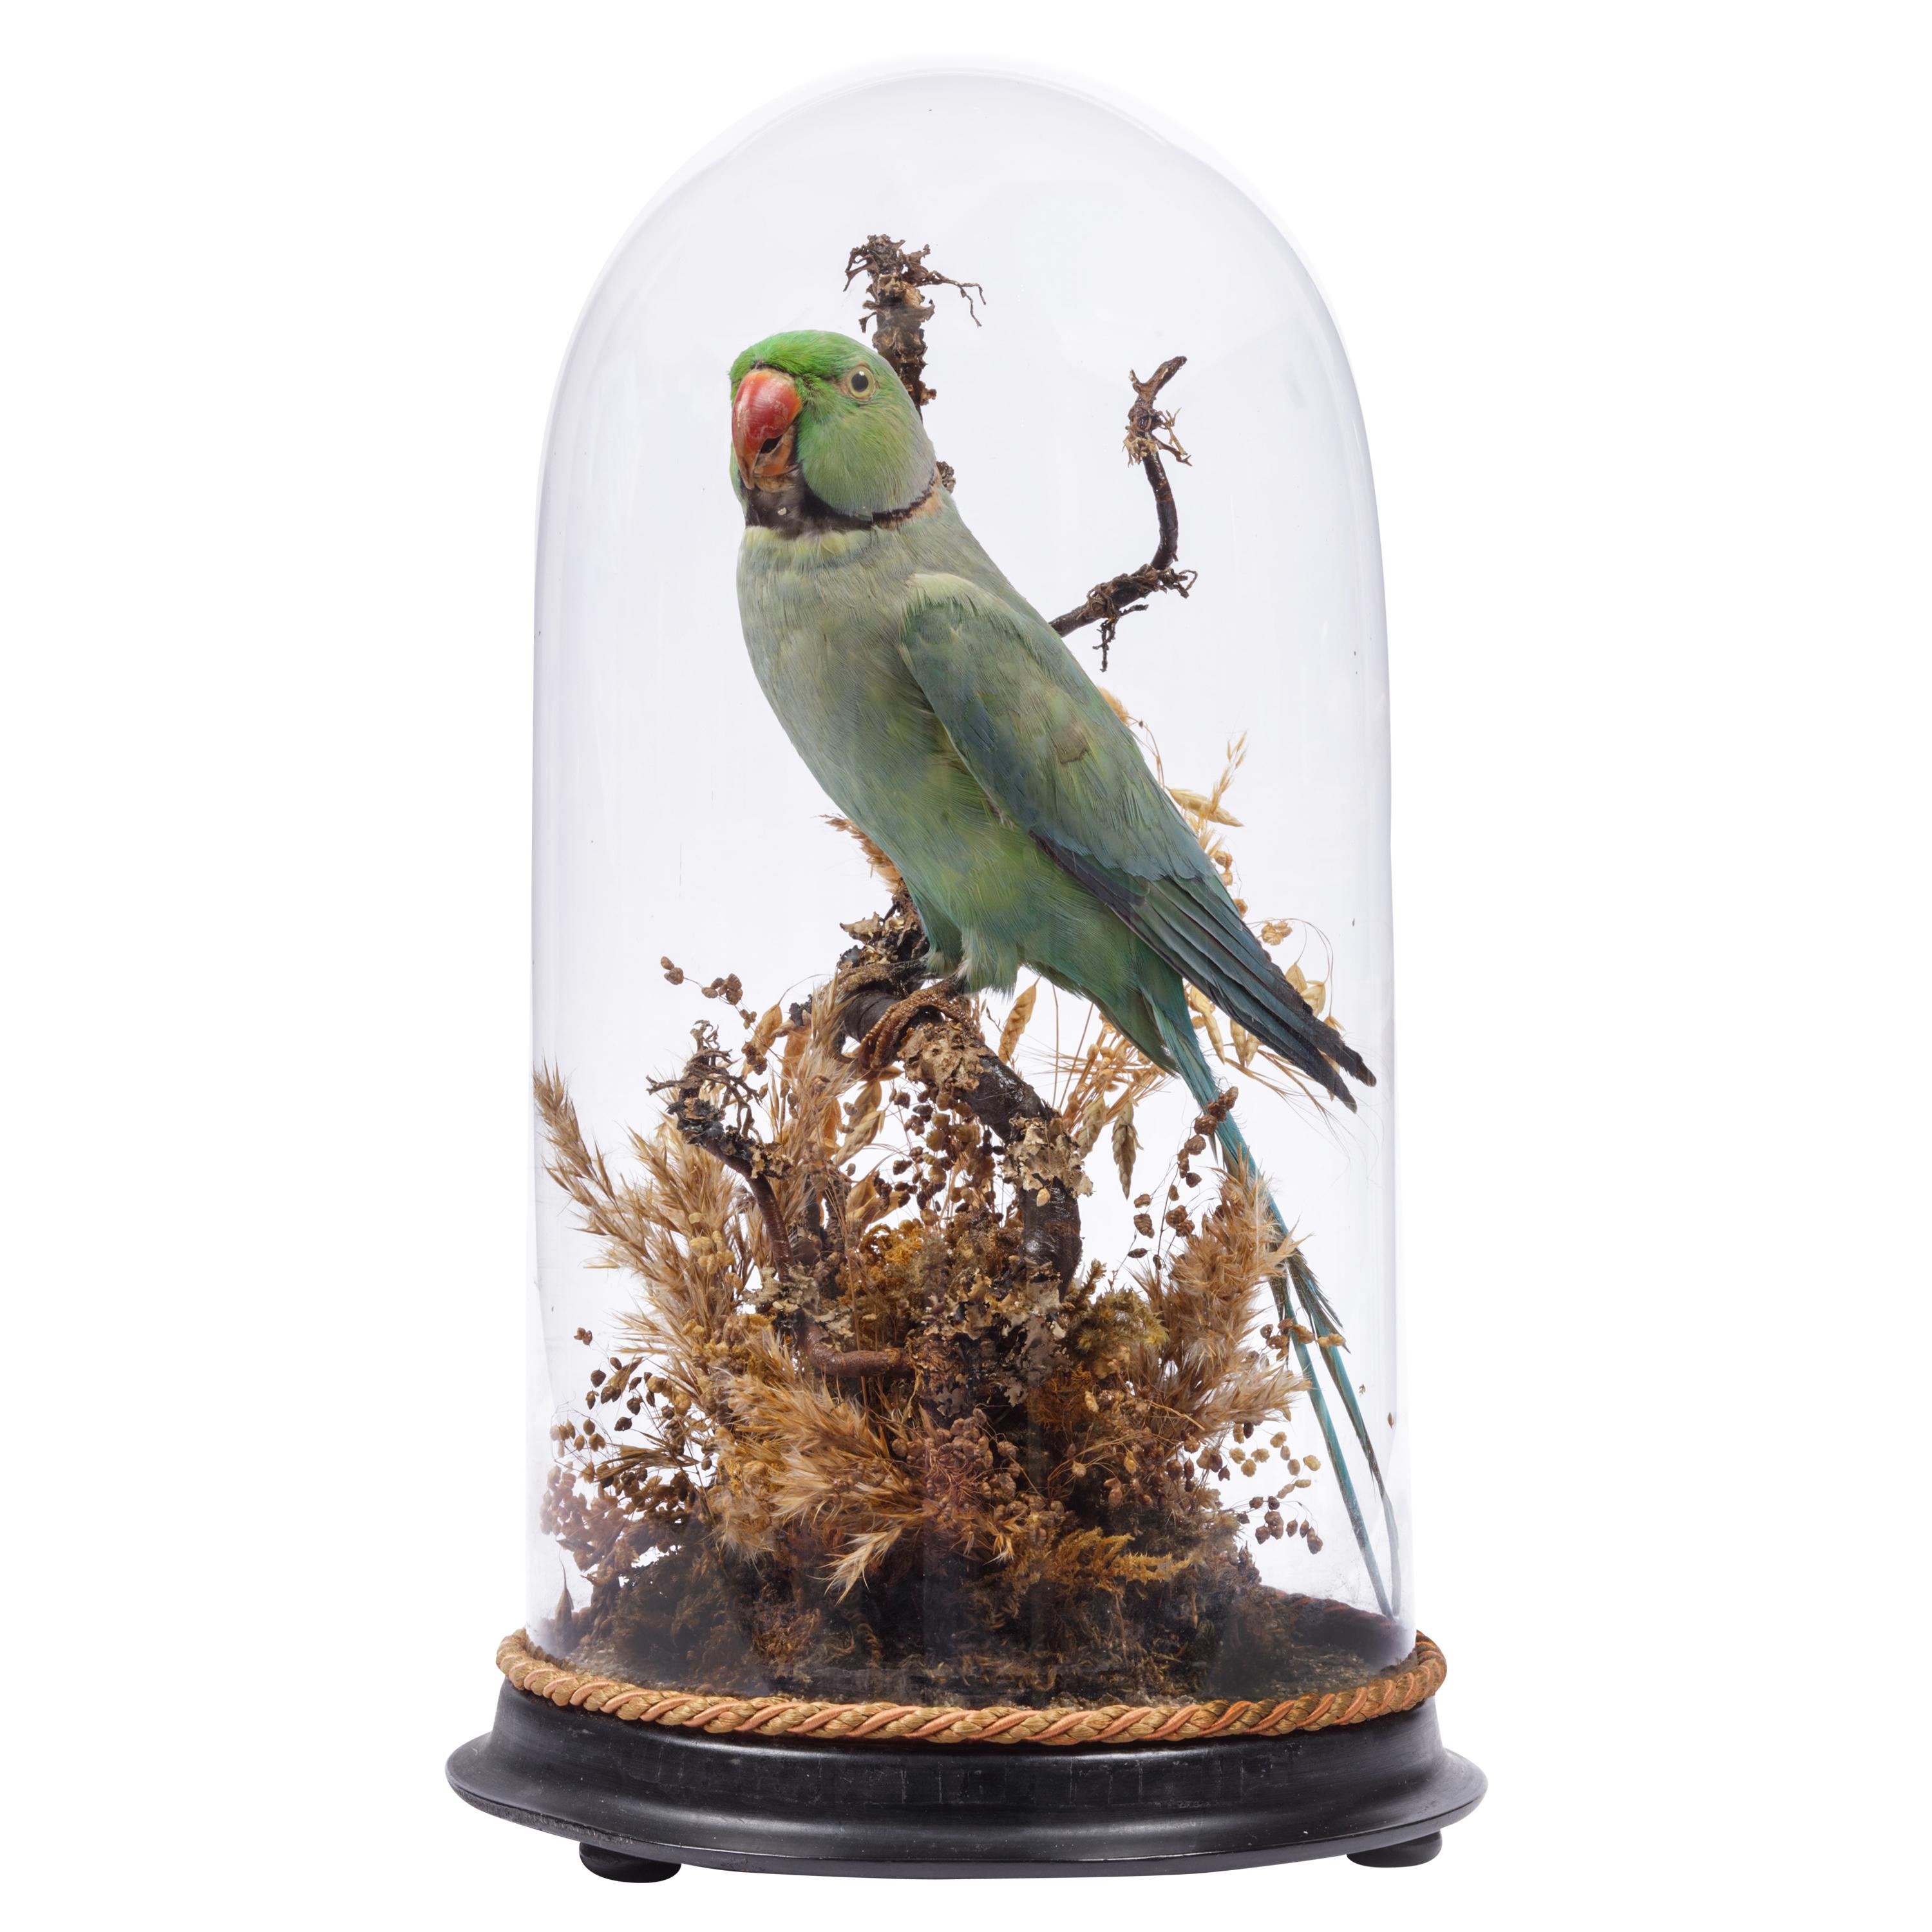 Charming Victorian Taxidermy Dome with Ring-Necked Parakeet